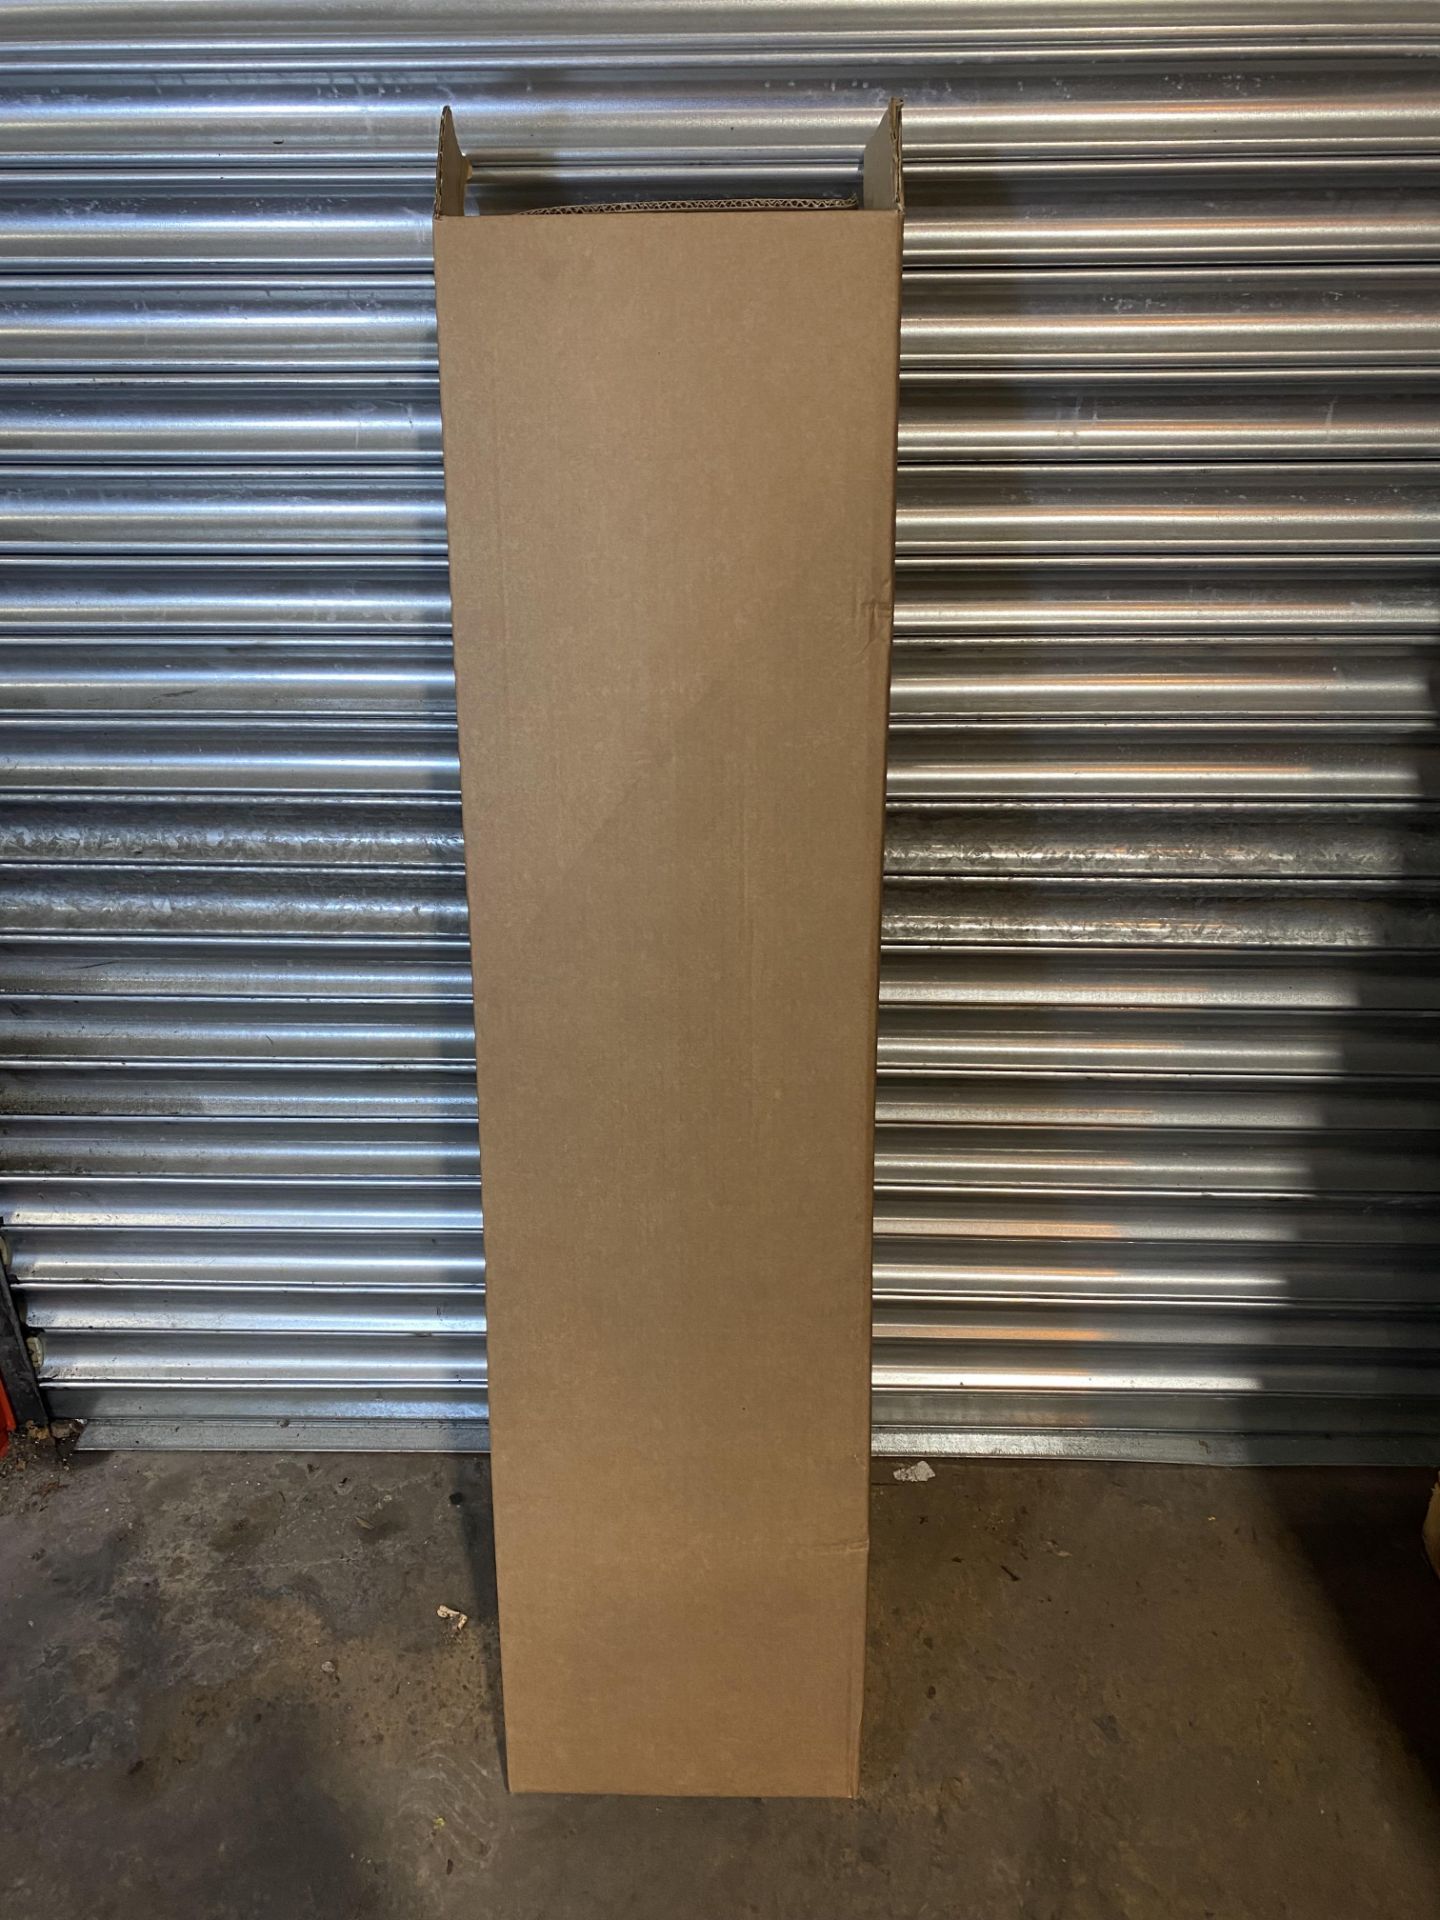 180 x Tall Double Wall Cardboard Boxes